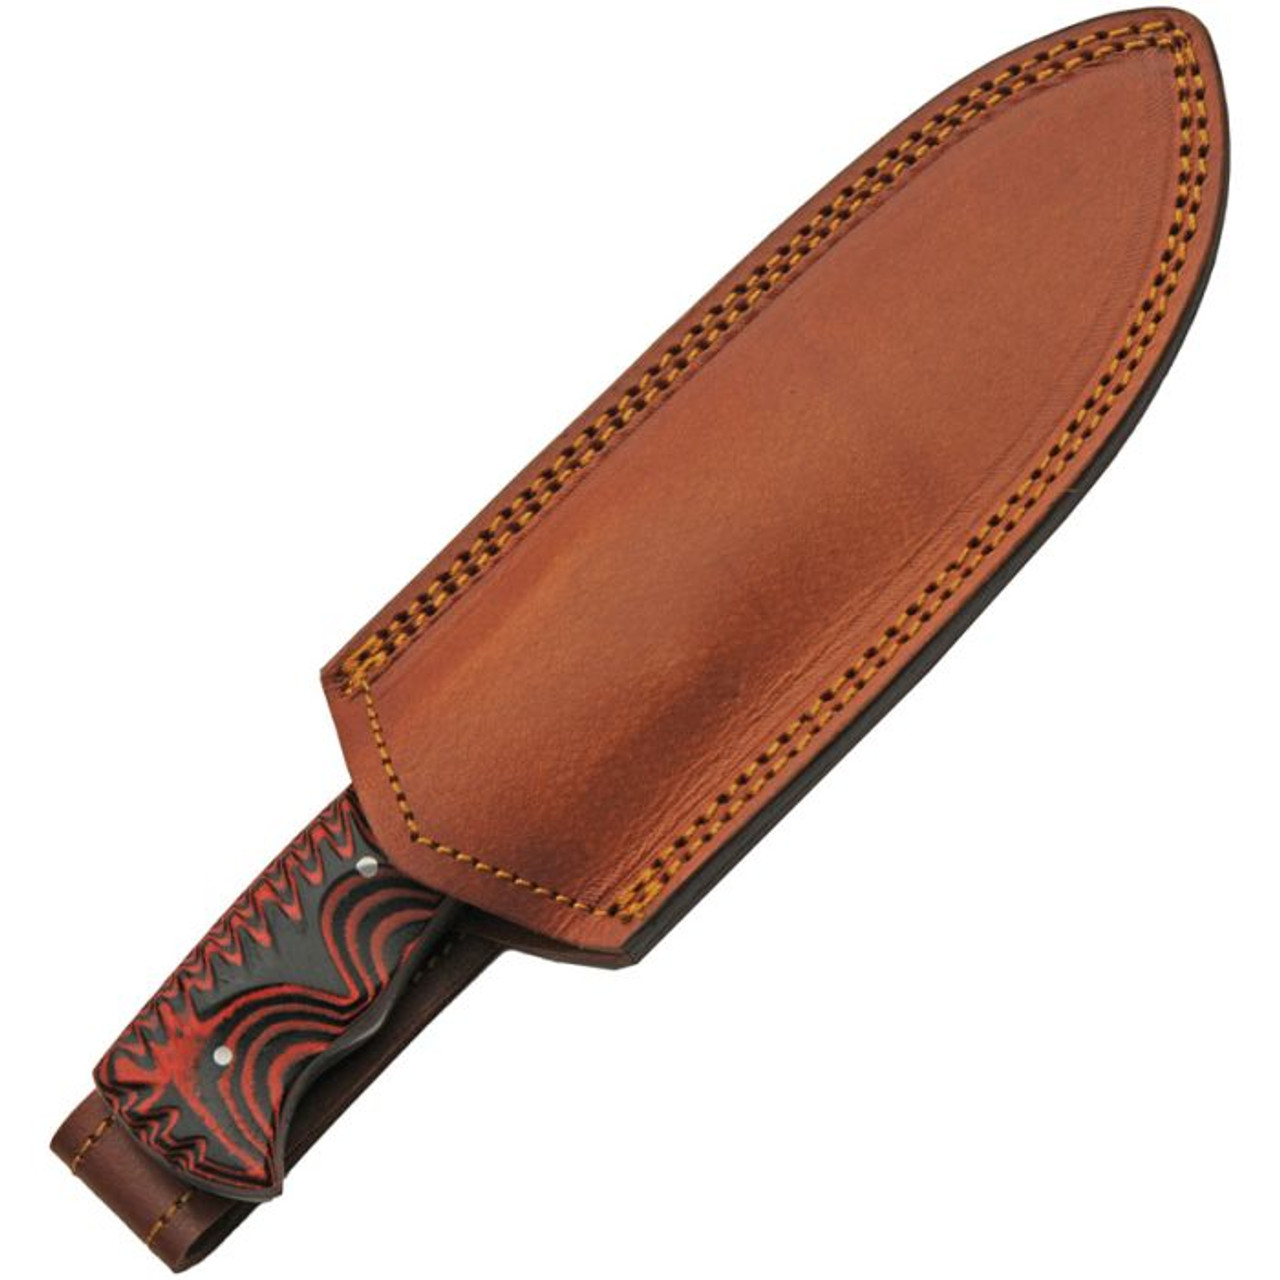 Damascus Knives Magma Hunter (DM1330) 4.5" Damascus Drop Point Plain Blade, Black and Red Grooved Micarta Handle, Brown Leather Belt Sheath